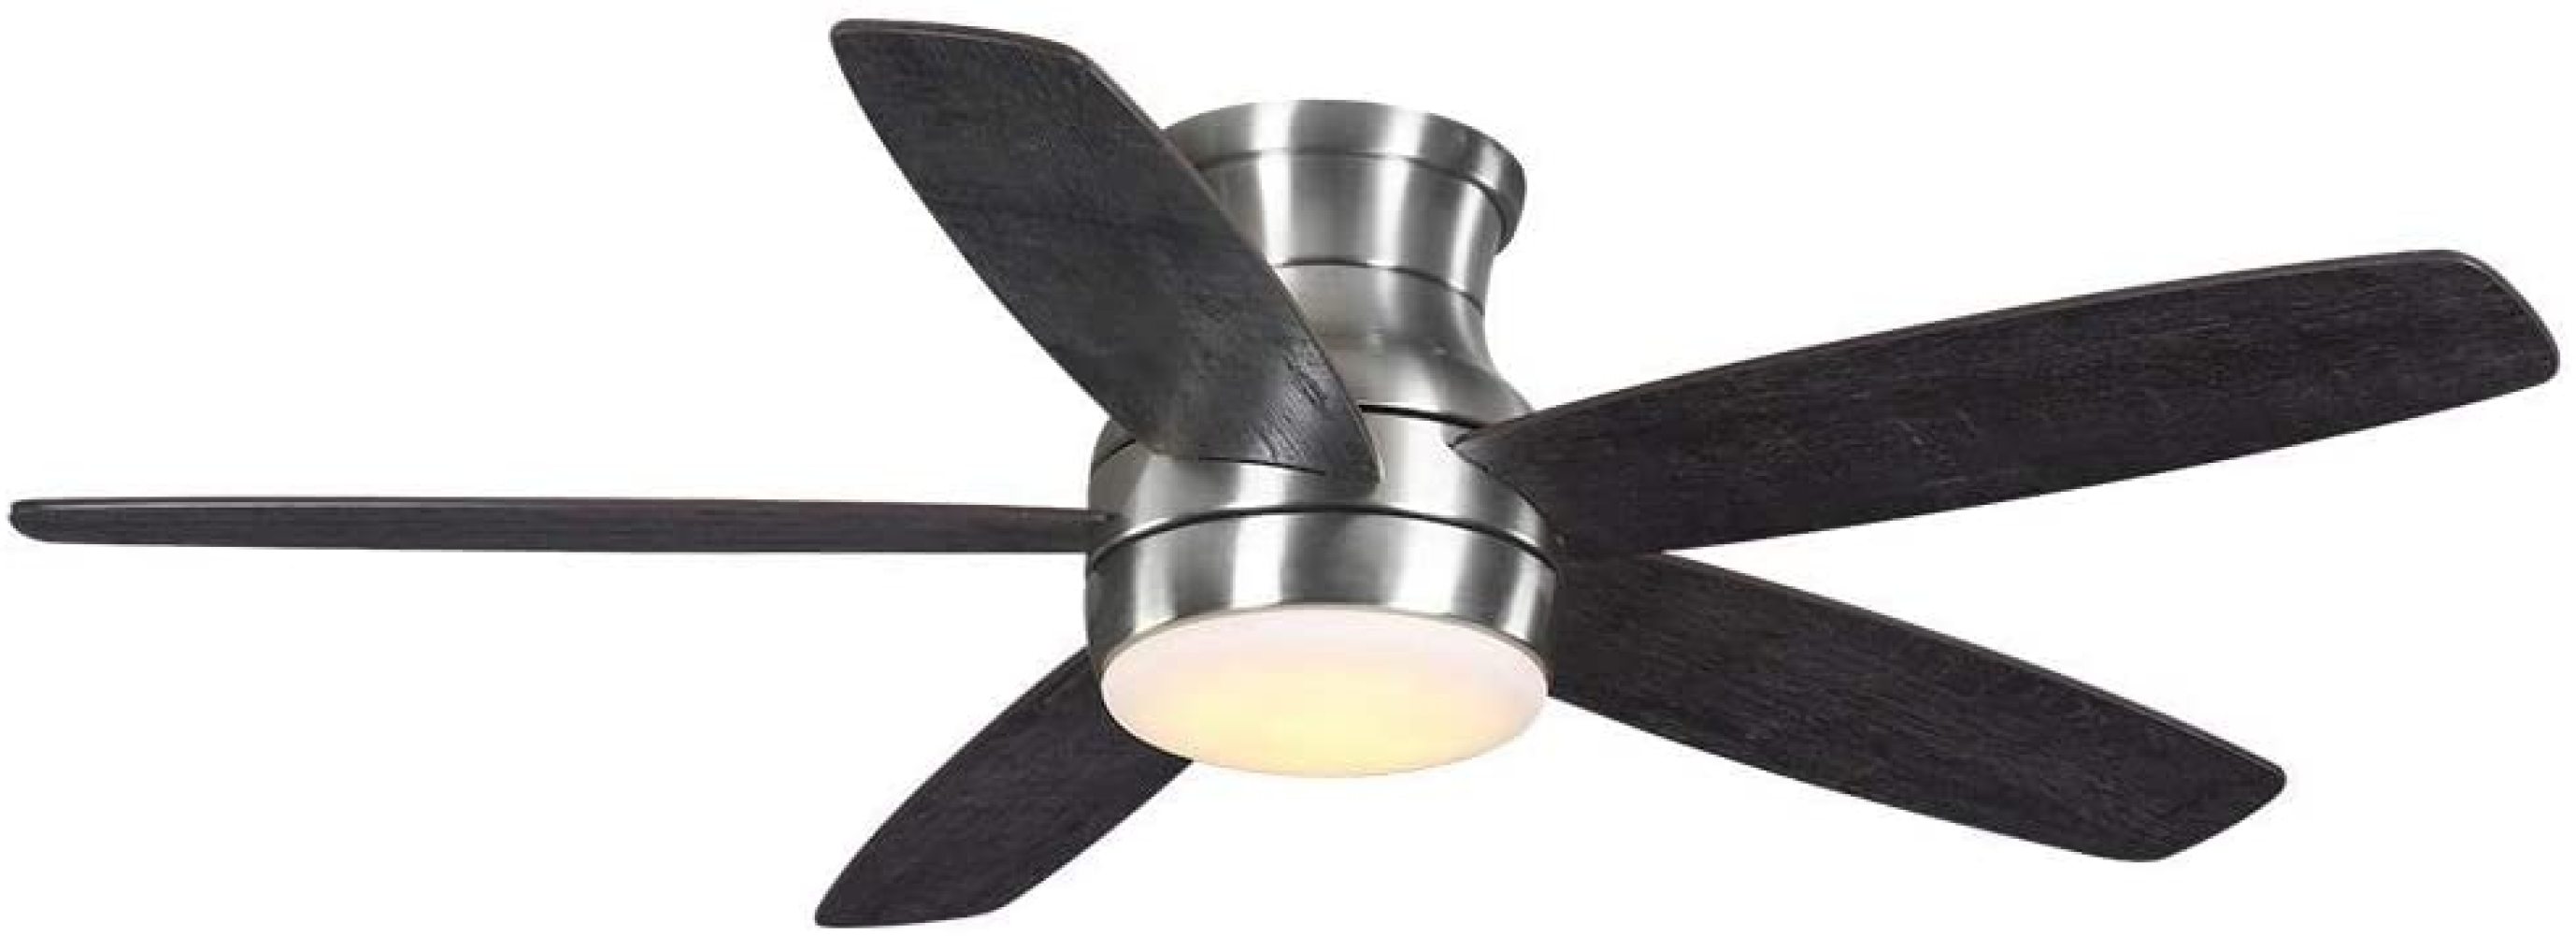 Home Decorators Collection Ashby Park 52 in. Integrated LED Brushed Nickel  Ceiling Fan with Light Kit and Remote Control Color Changing Technology 